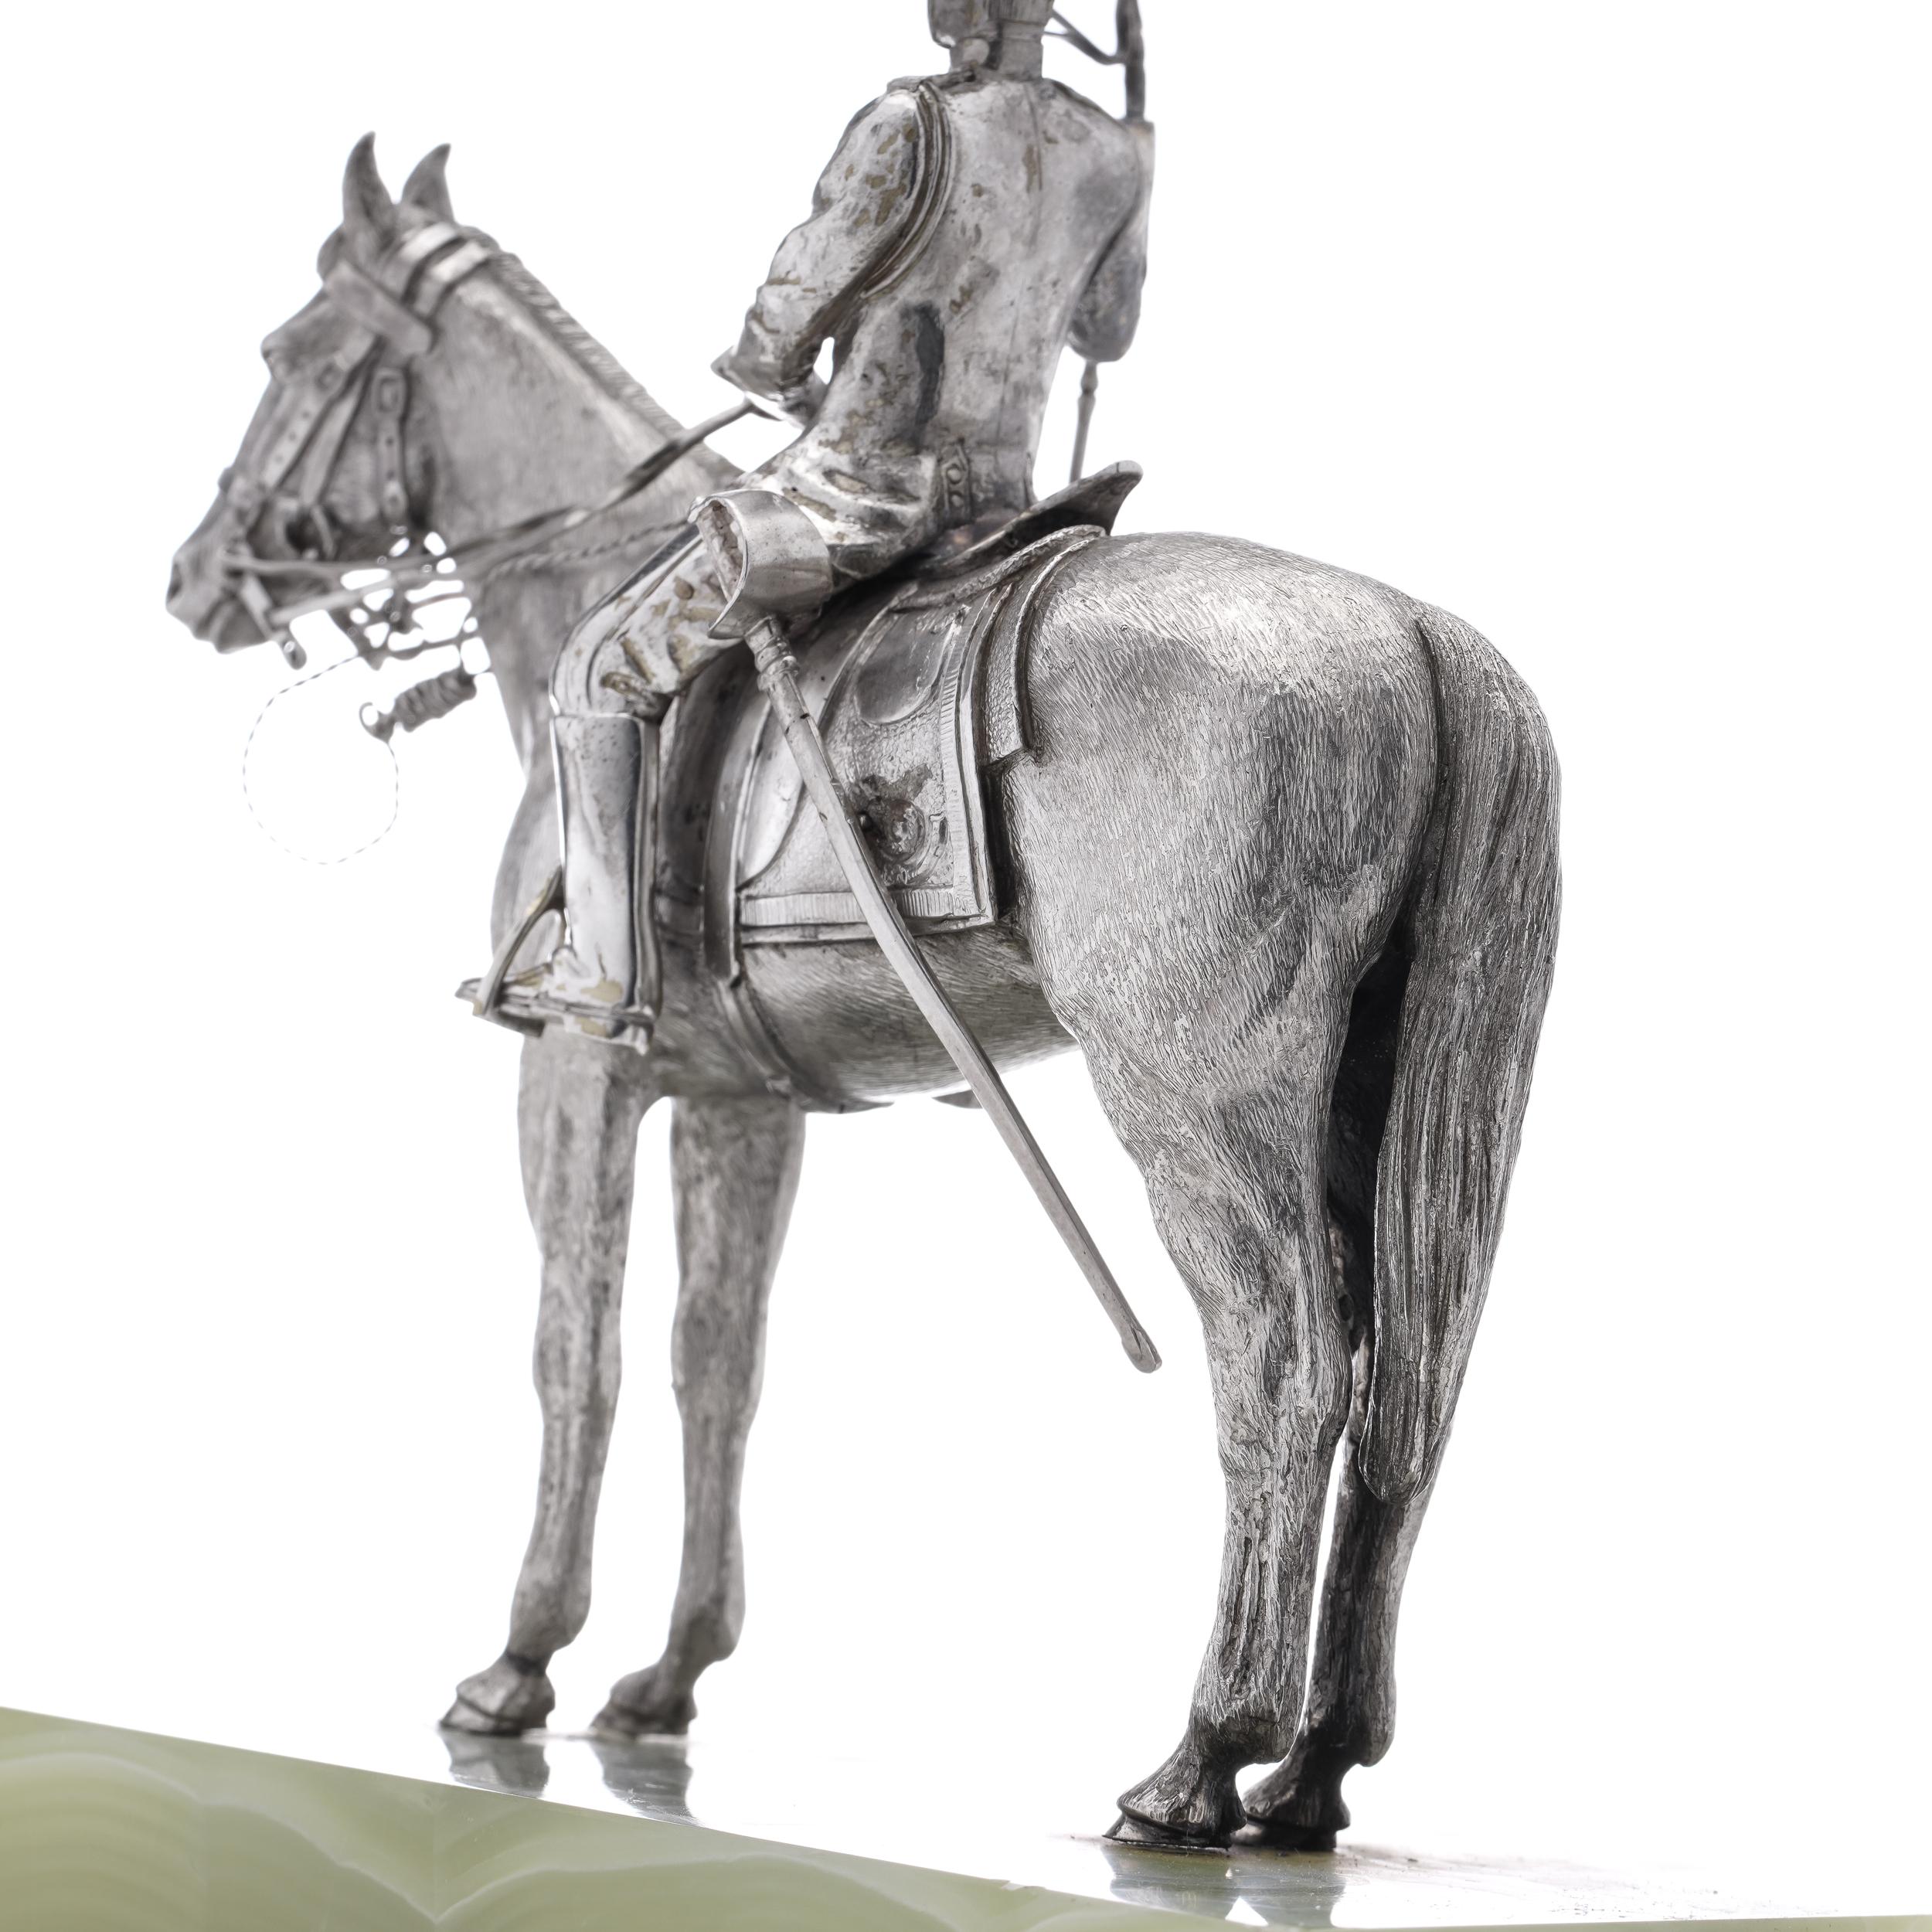 Asprey Pair or Horseriding Solid Silver Figurines on Marble Bases, London, 1977 For Sale 3